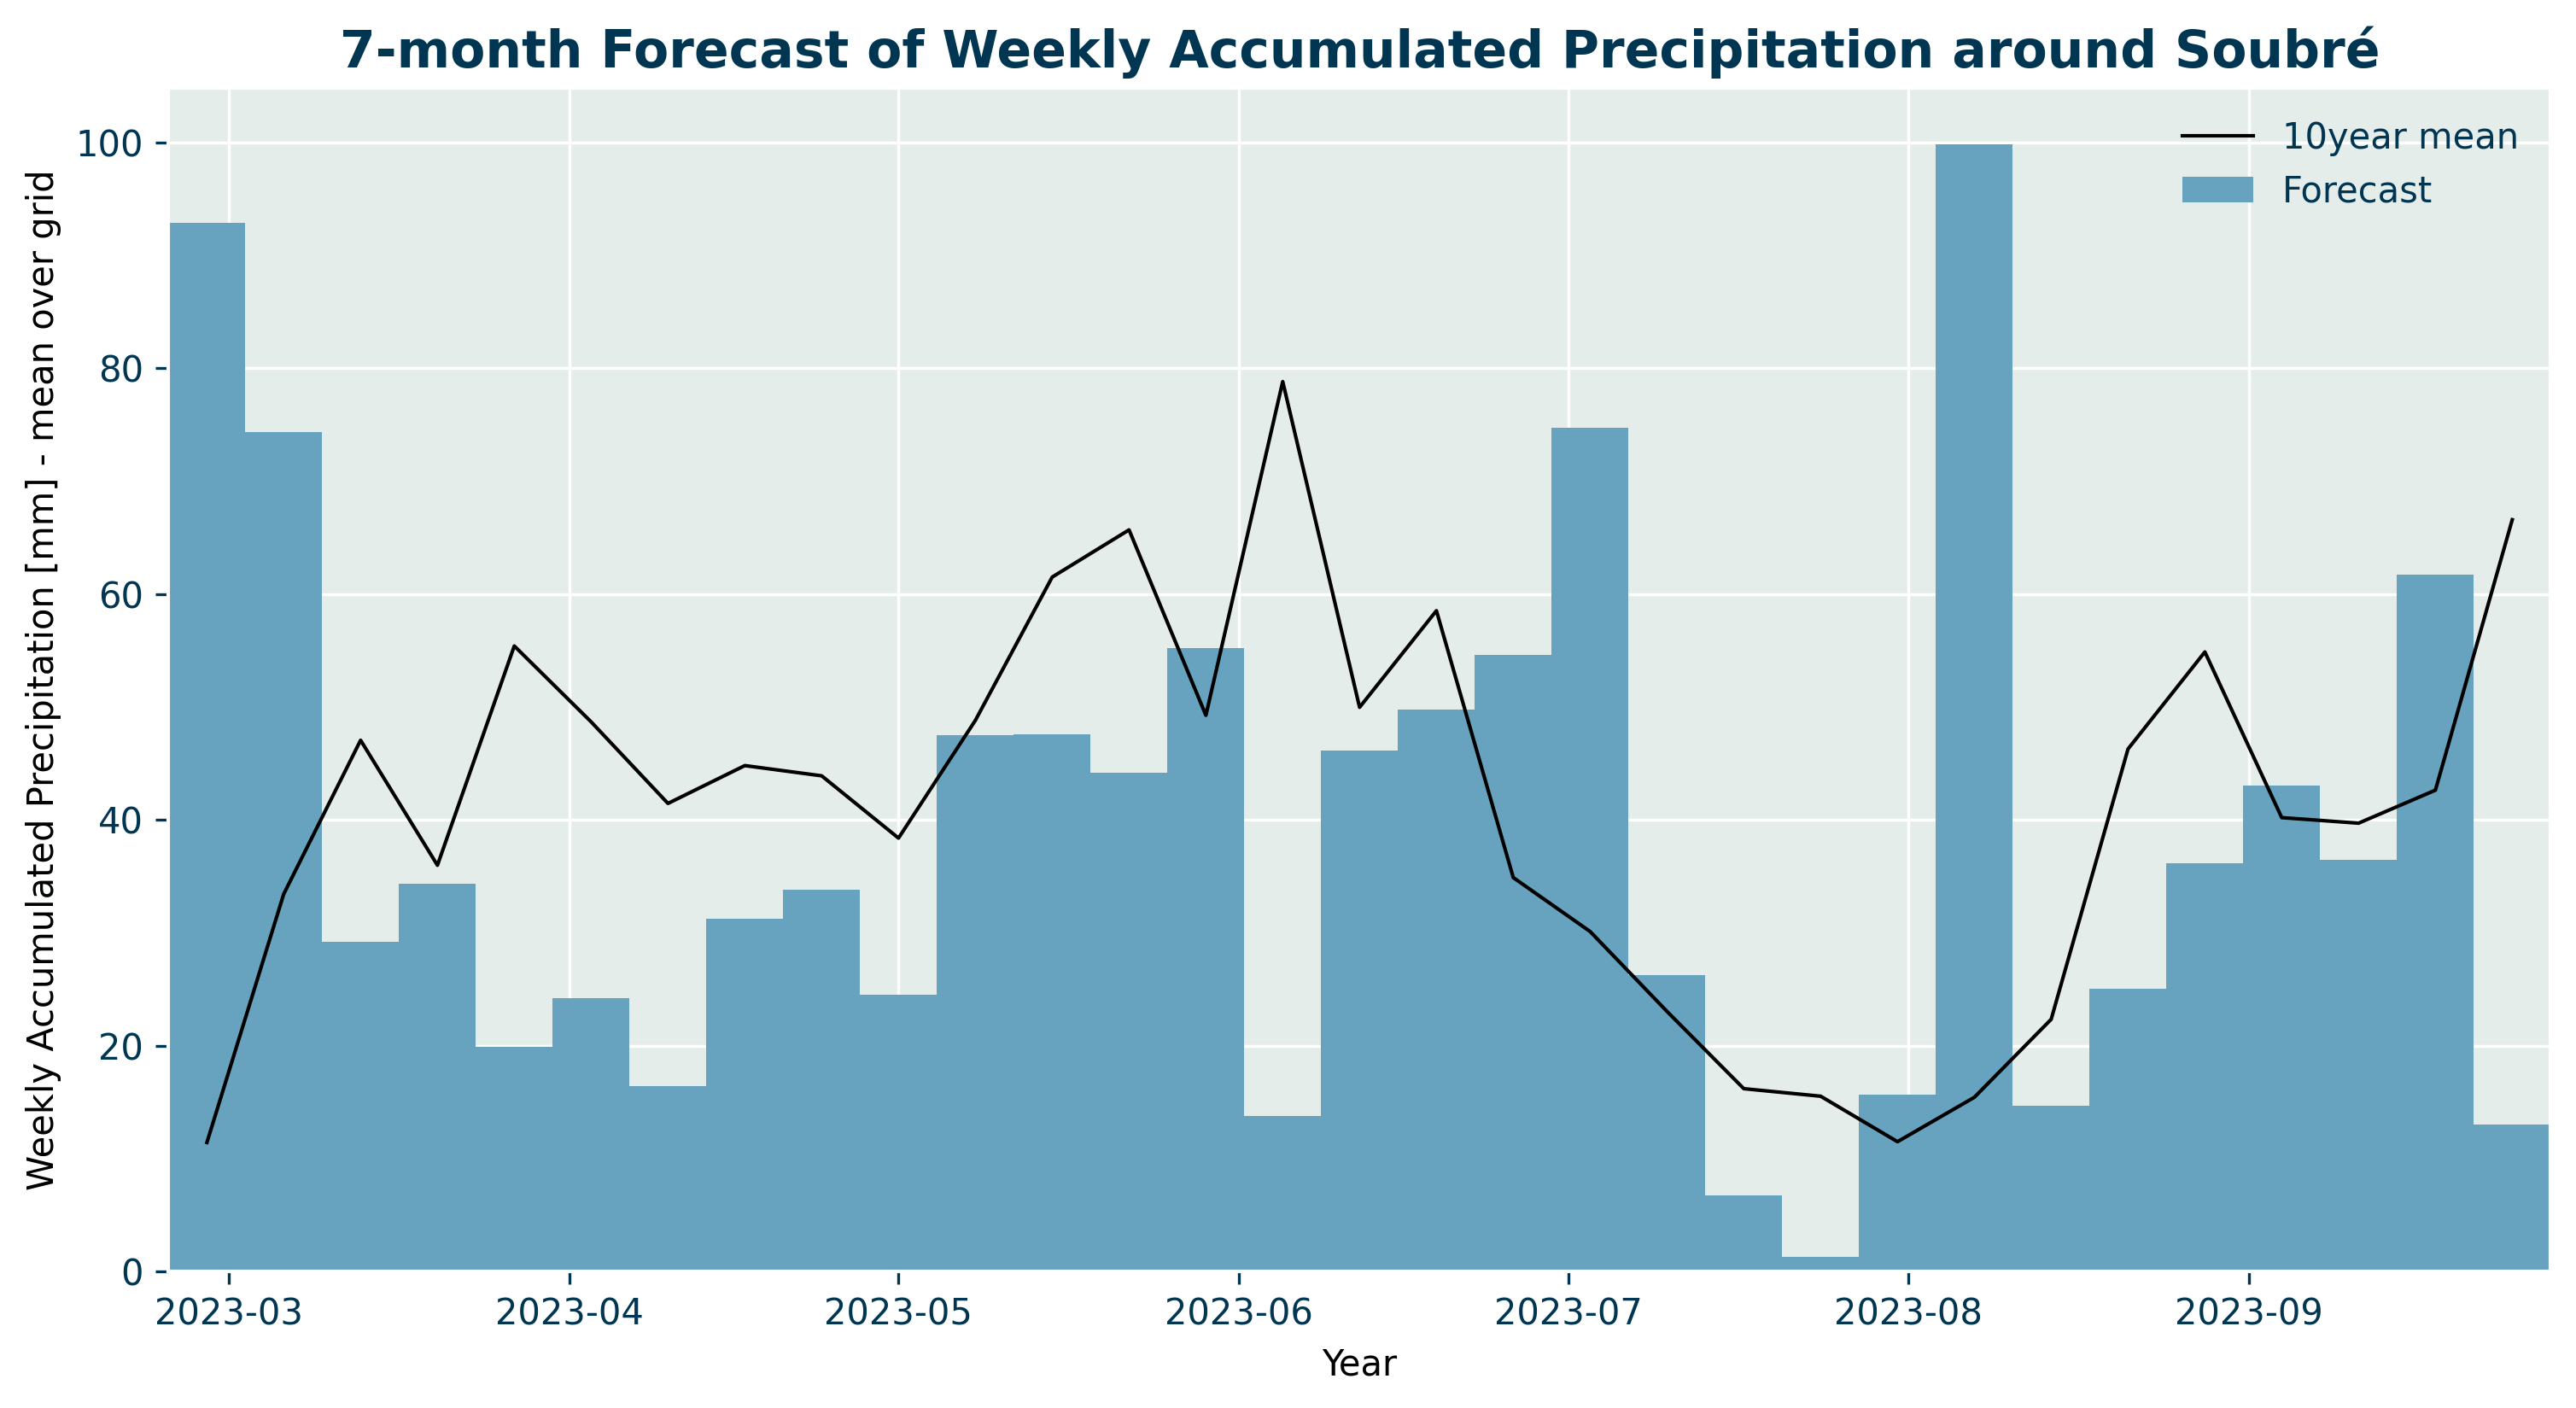 7-month forecast of weekly accumulated precipitation around Soubre